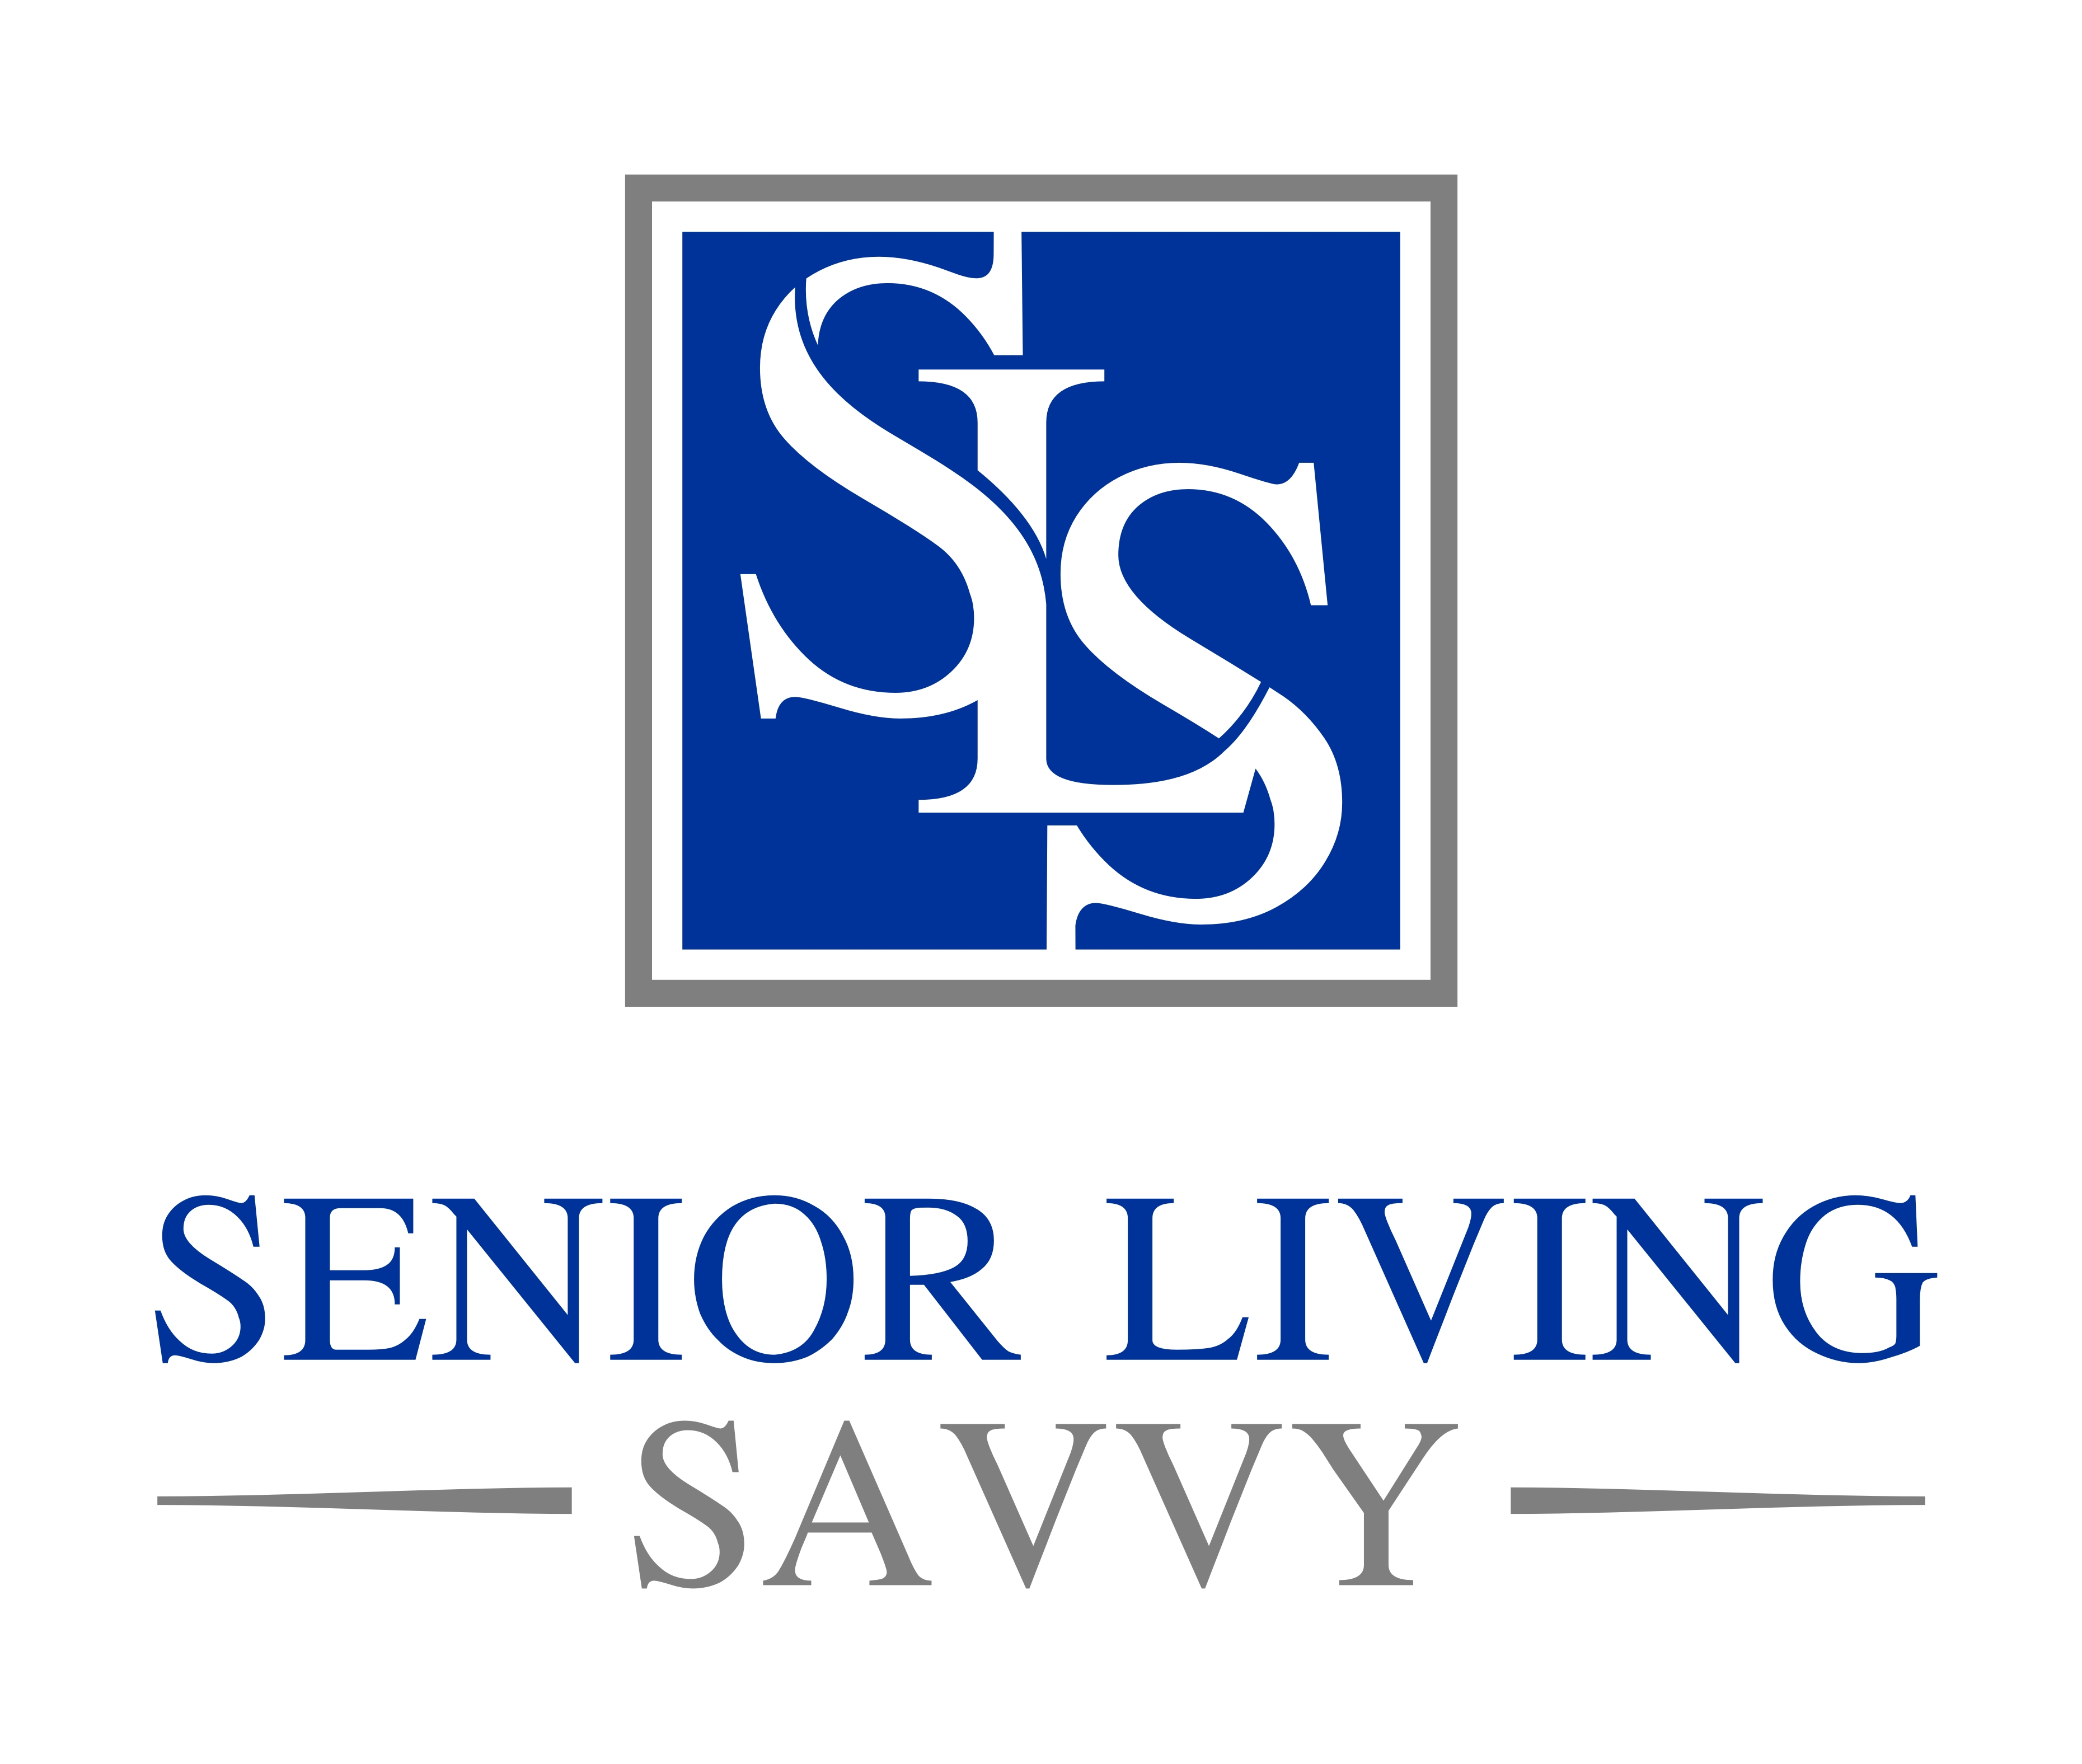 Senior Living Savvy by William Young